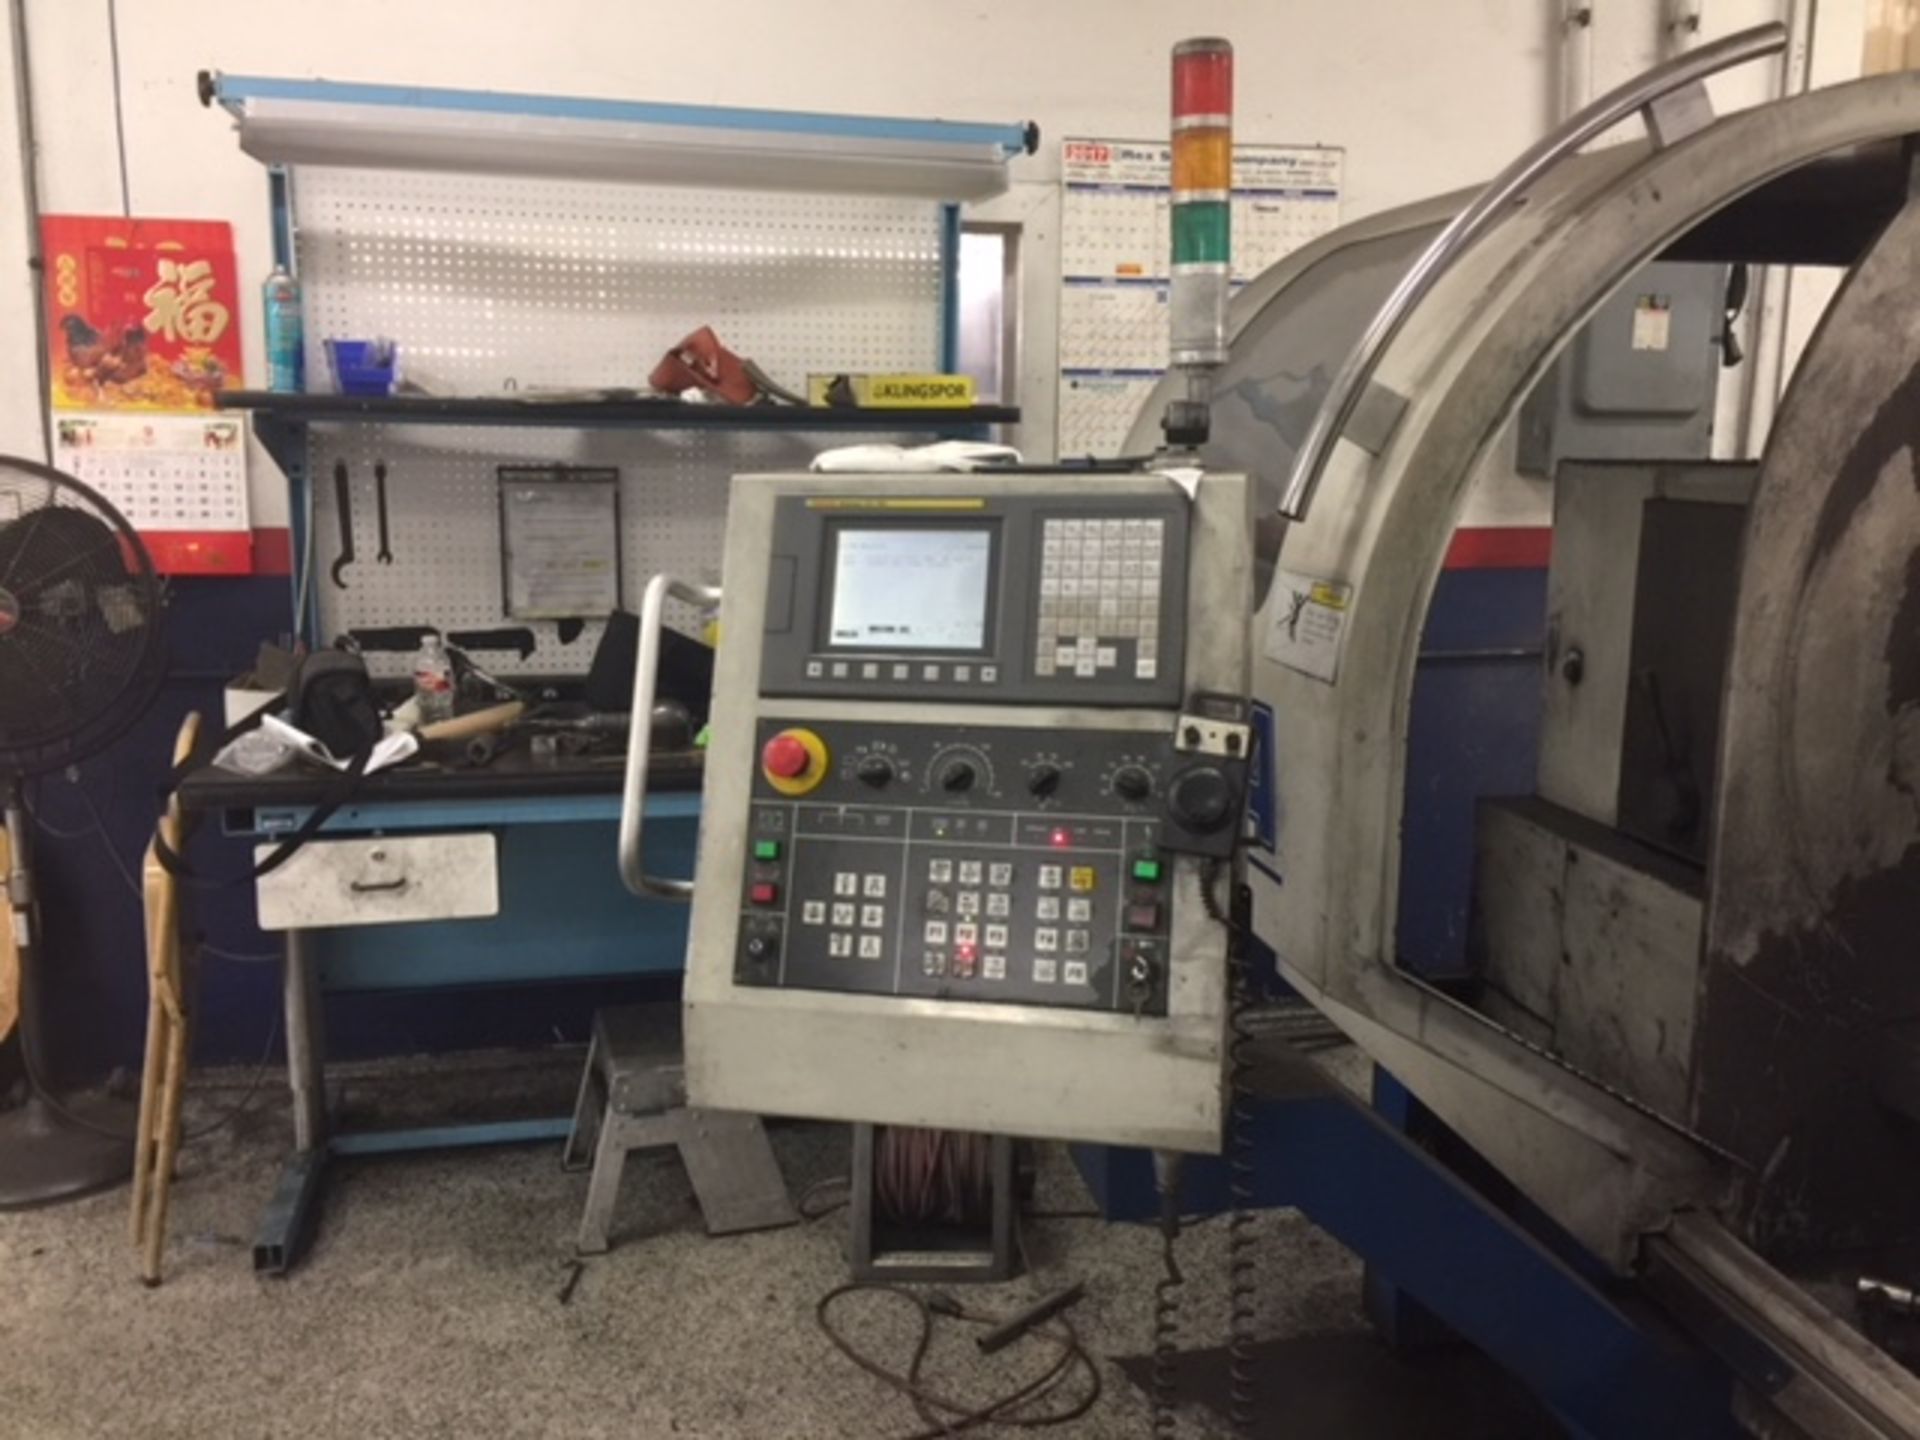 24" x 40" Acra Model FEL-24x40-ENC CNC Lathe with C Axis Milling - Image 5 of 10